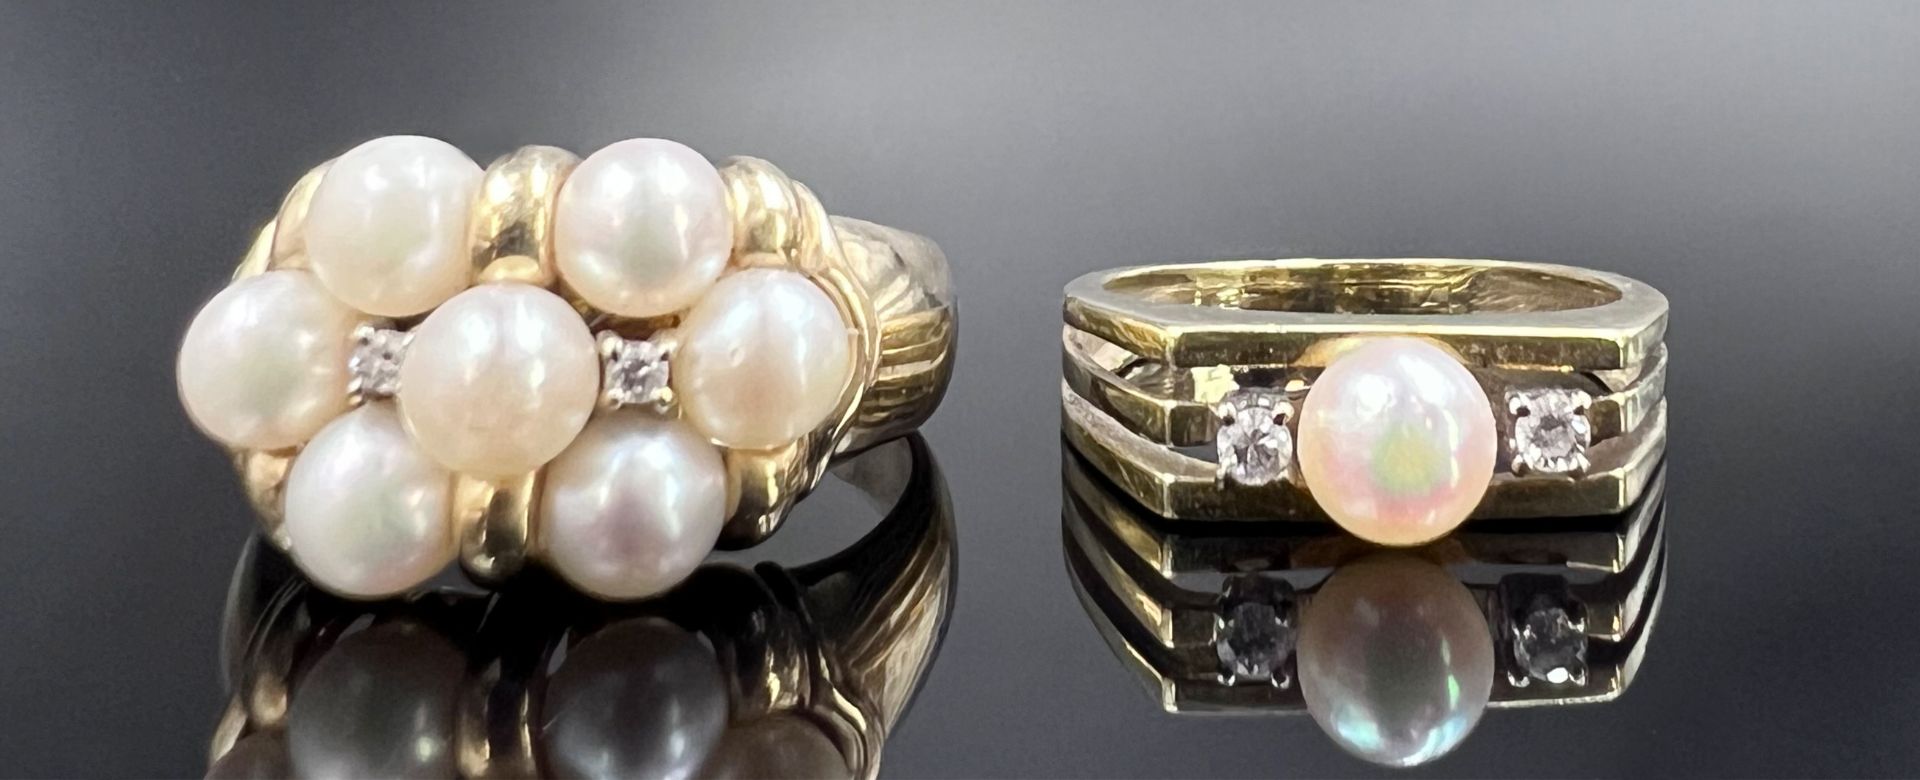 Two ladies' rings. 585 yellow gold with pearls and small diamonds. - Image 2 of 9